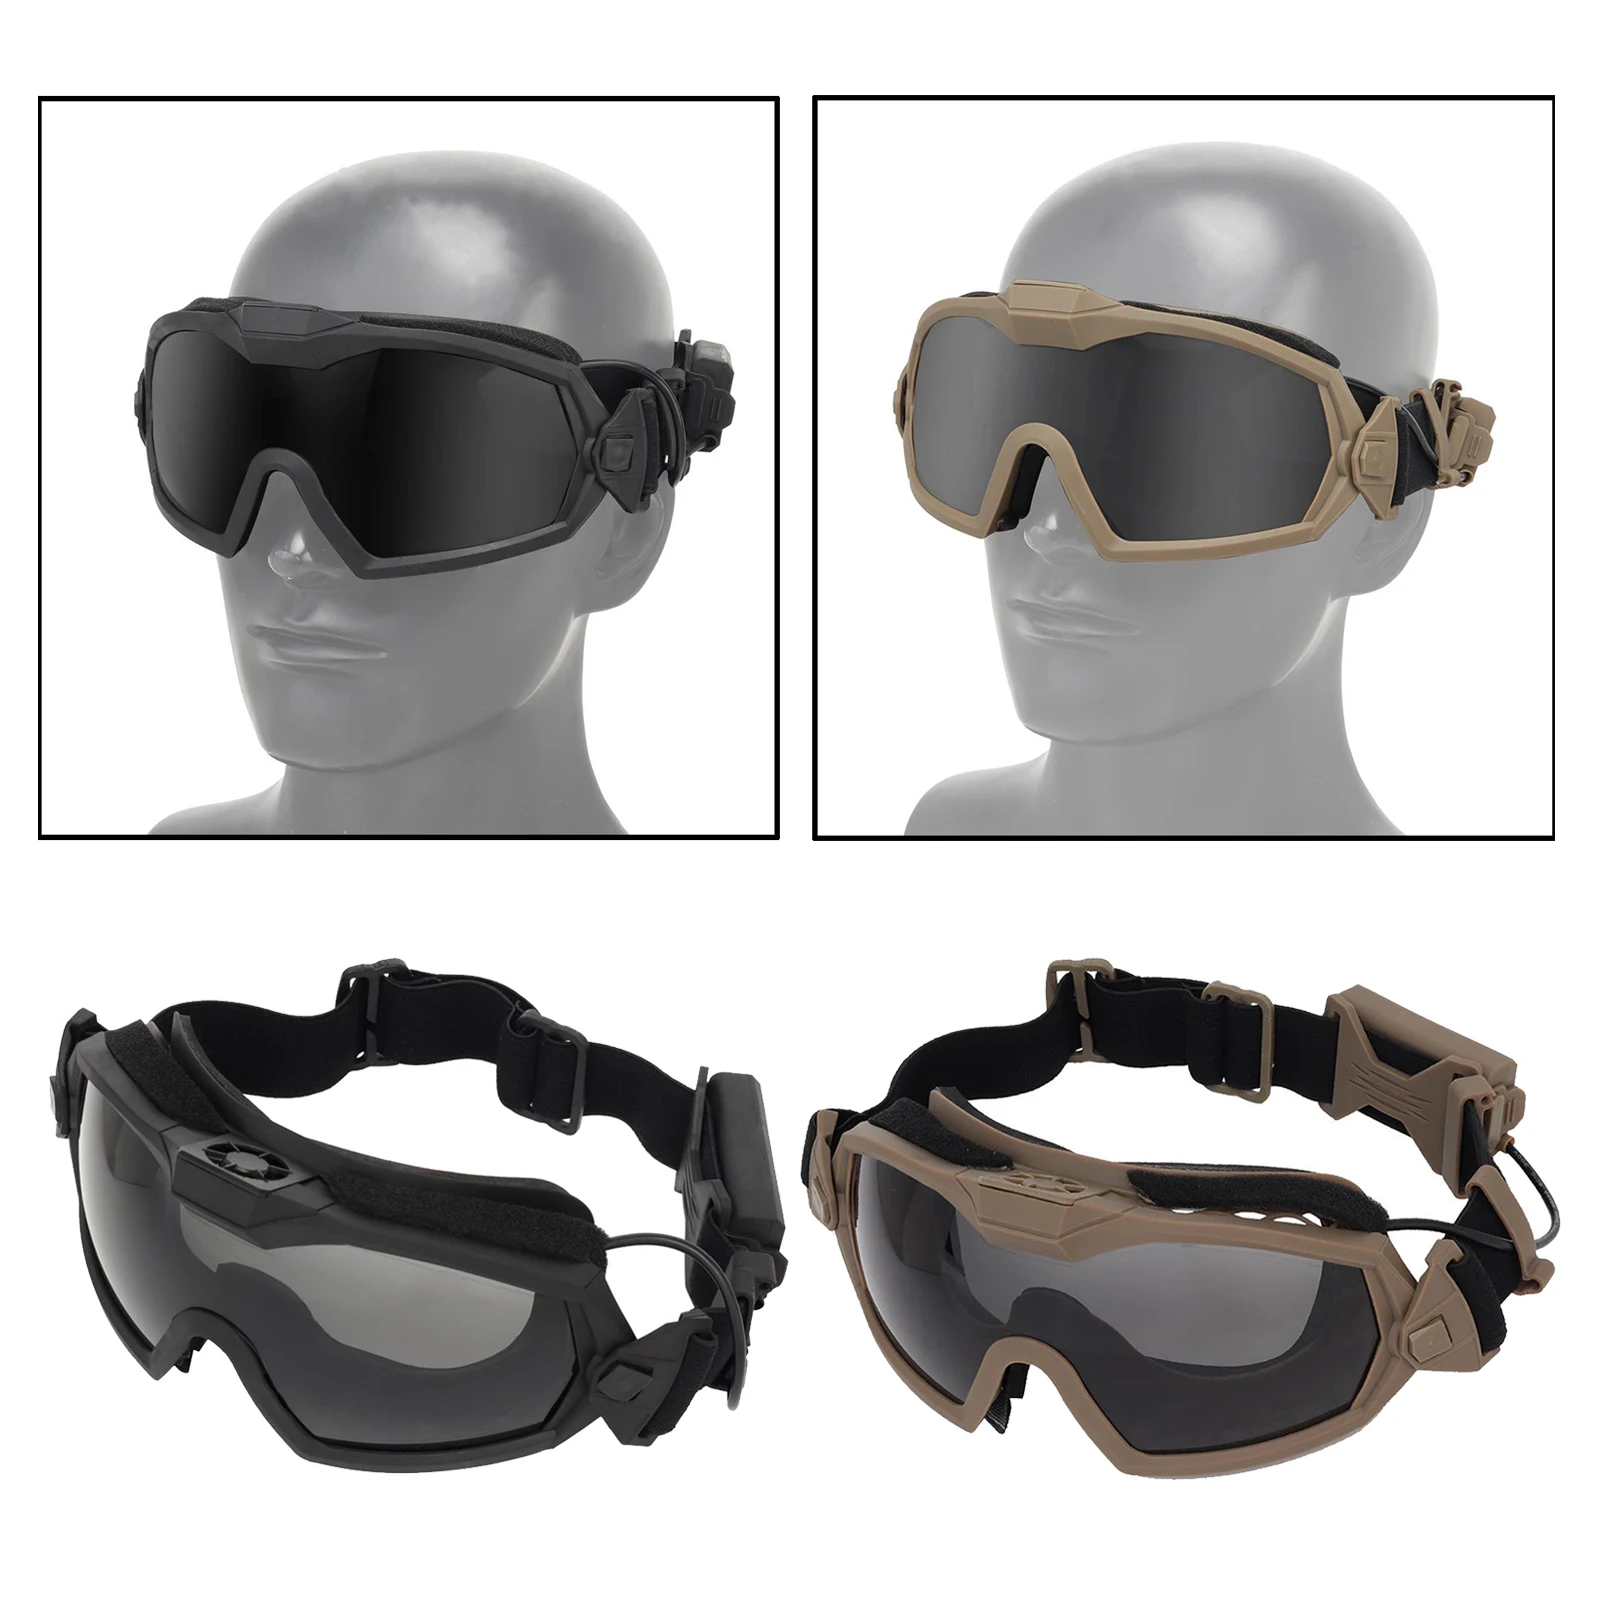 Tactical Goggles Windproof Goggle Breathable Impact Resistance Eyewear 